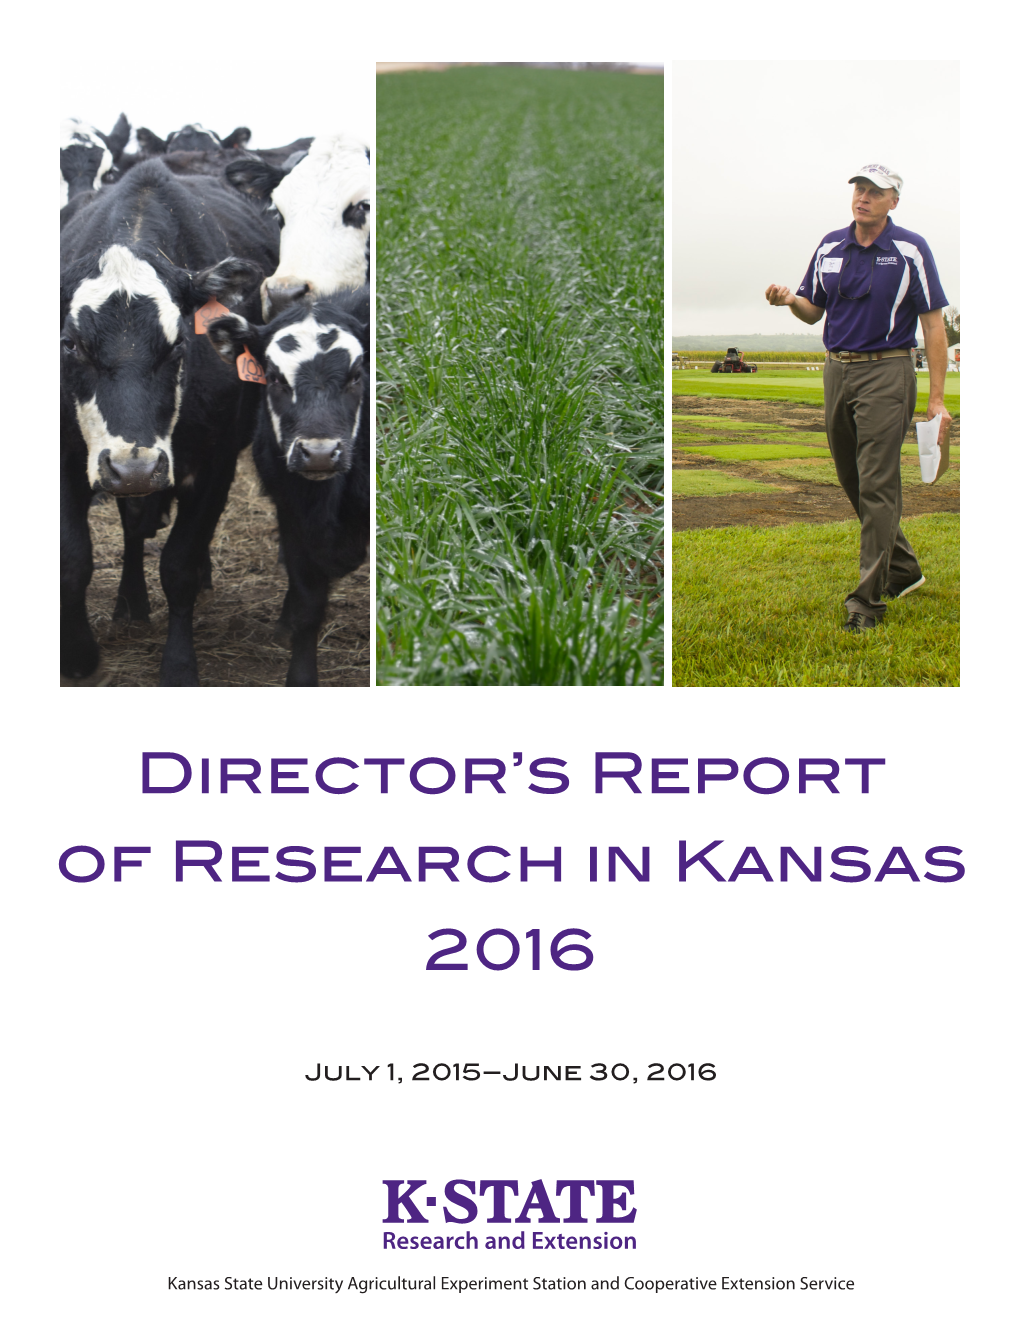 DRR16 Director's Report of Research in Kansas, 2016